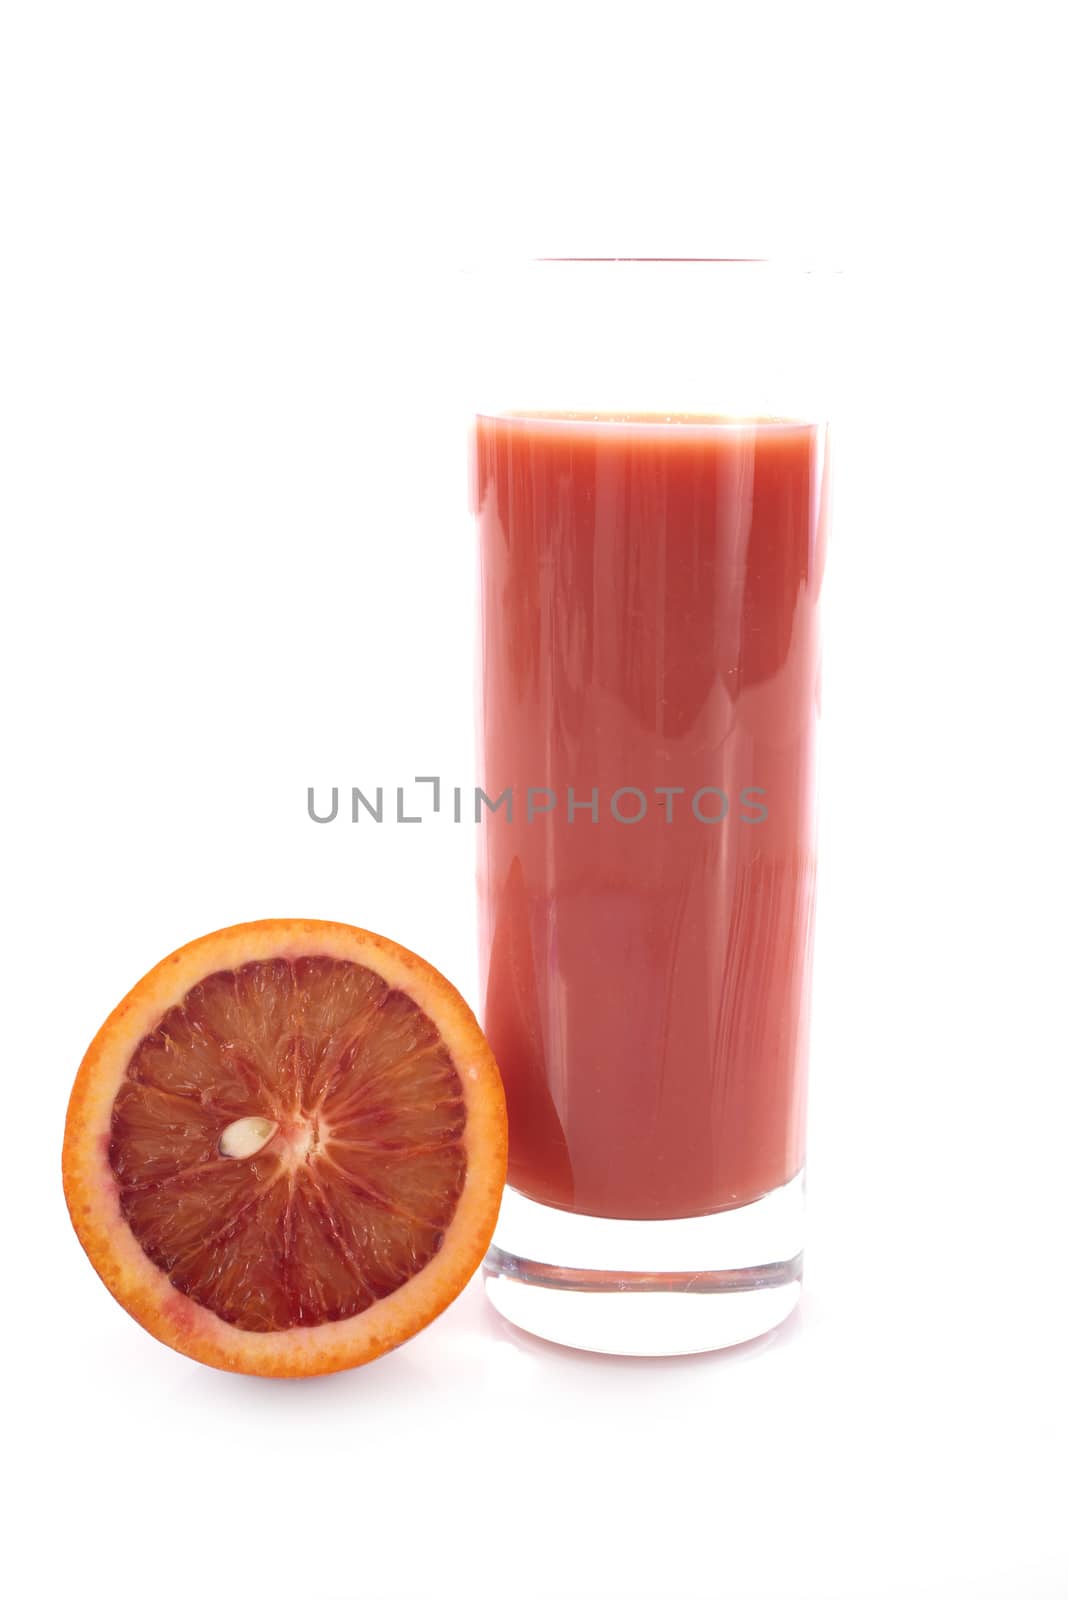 blood orange juice in front of white background